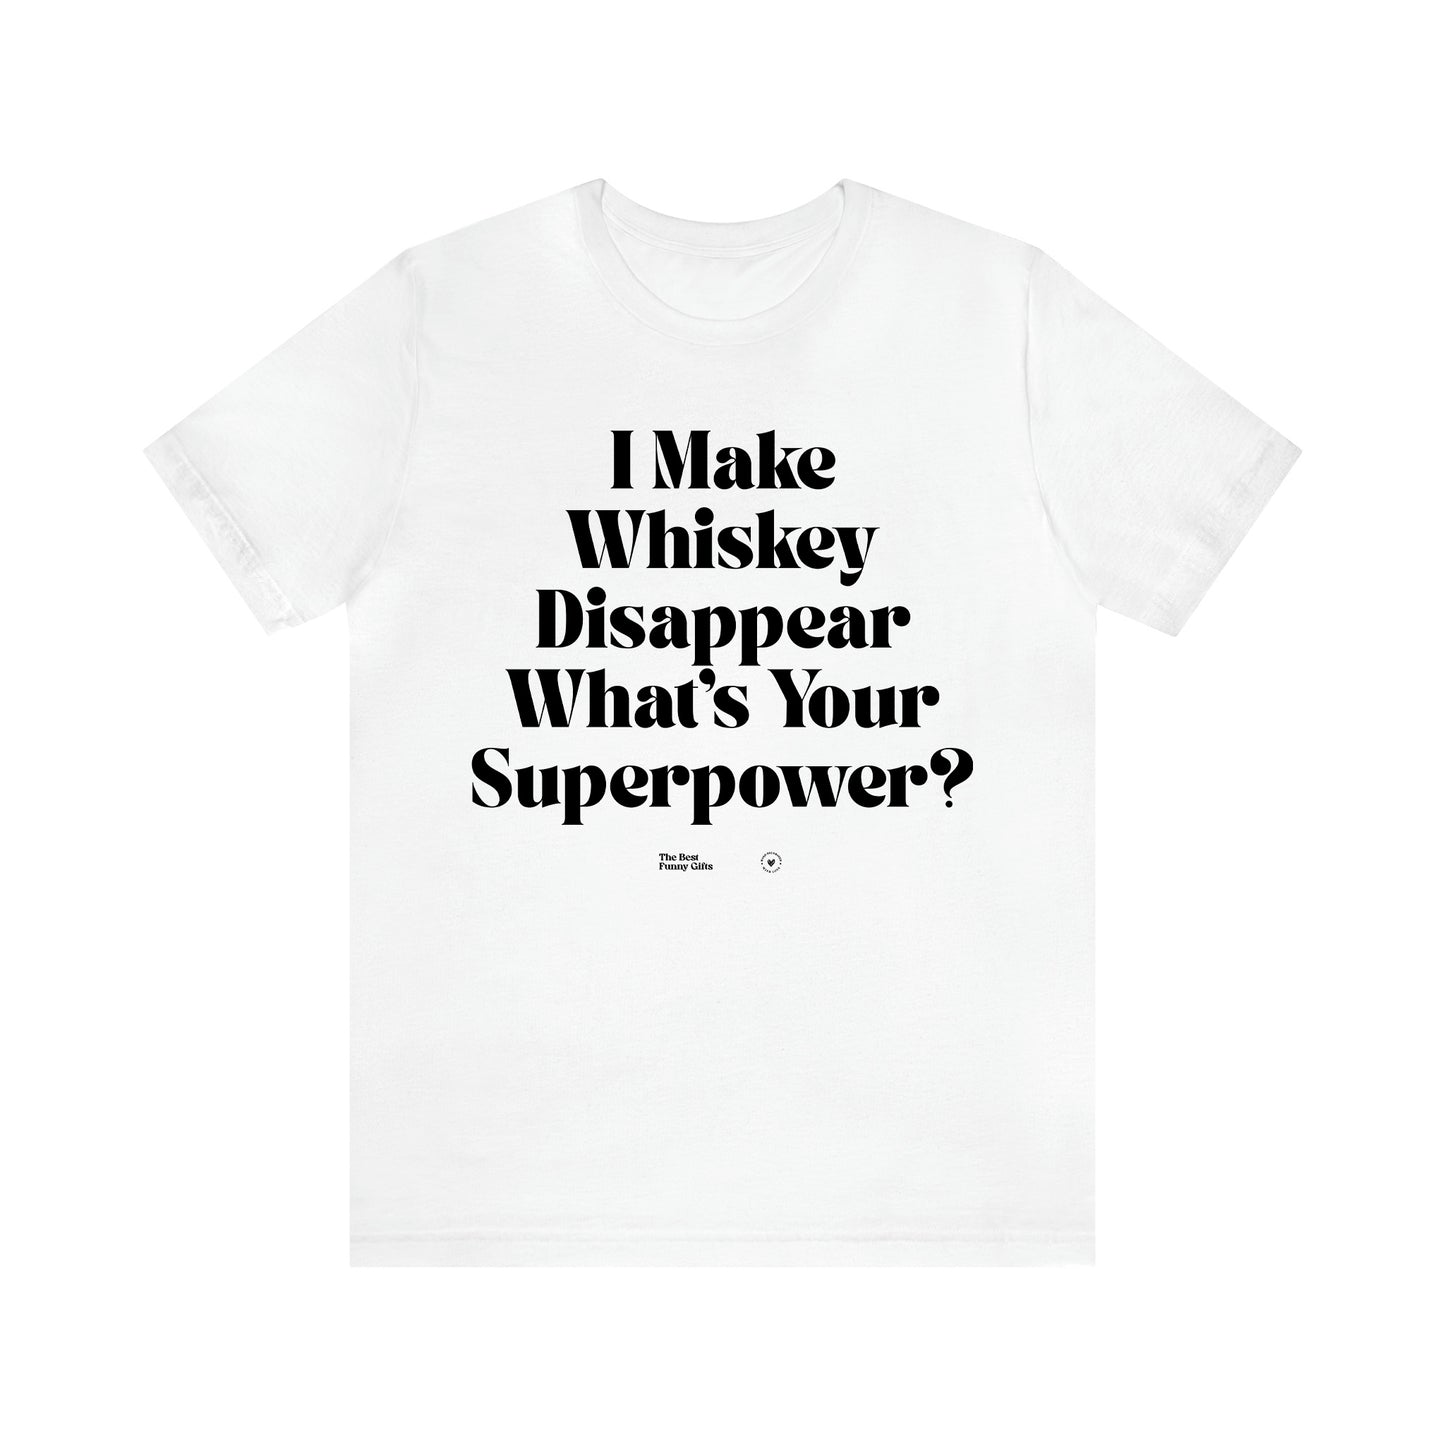 Women's T Shirts I Make Whiskey Disappear What's Your Superpower? - The Best Funny Gifts